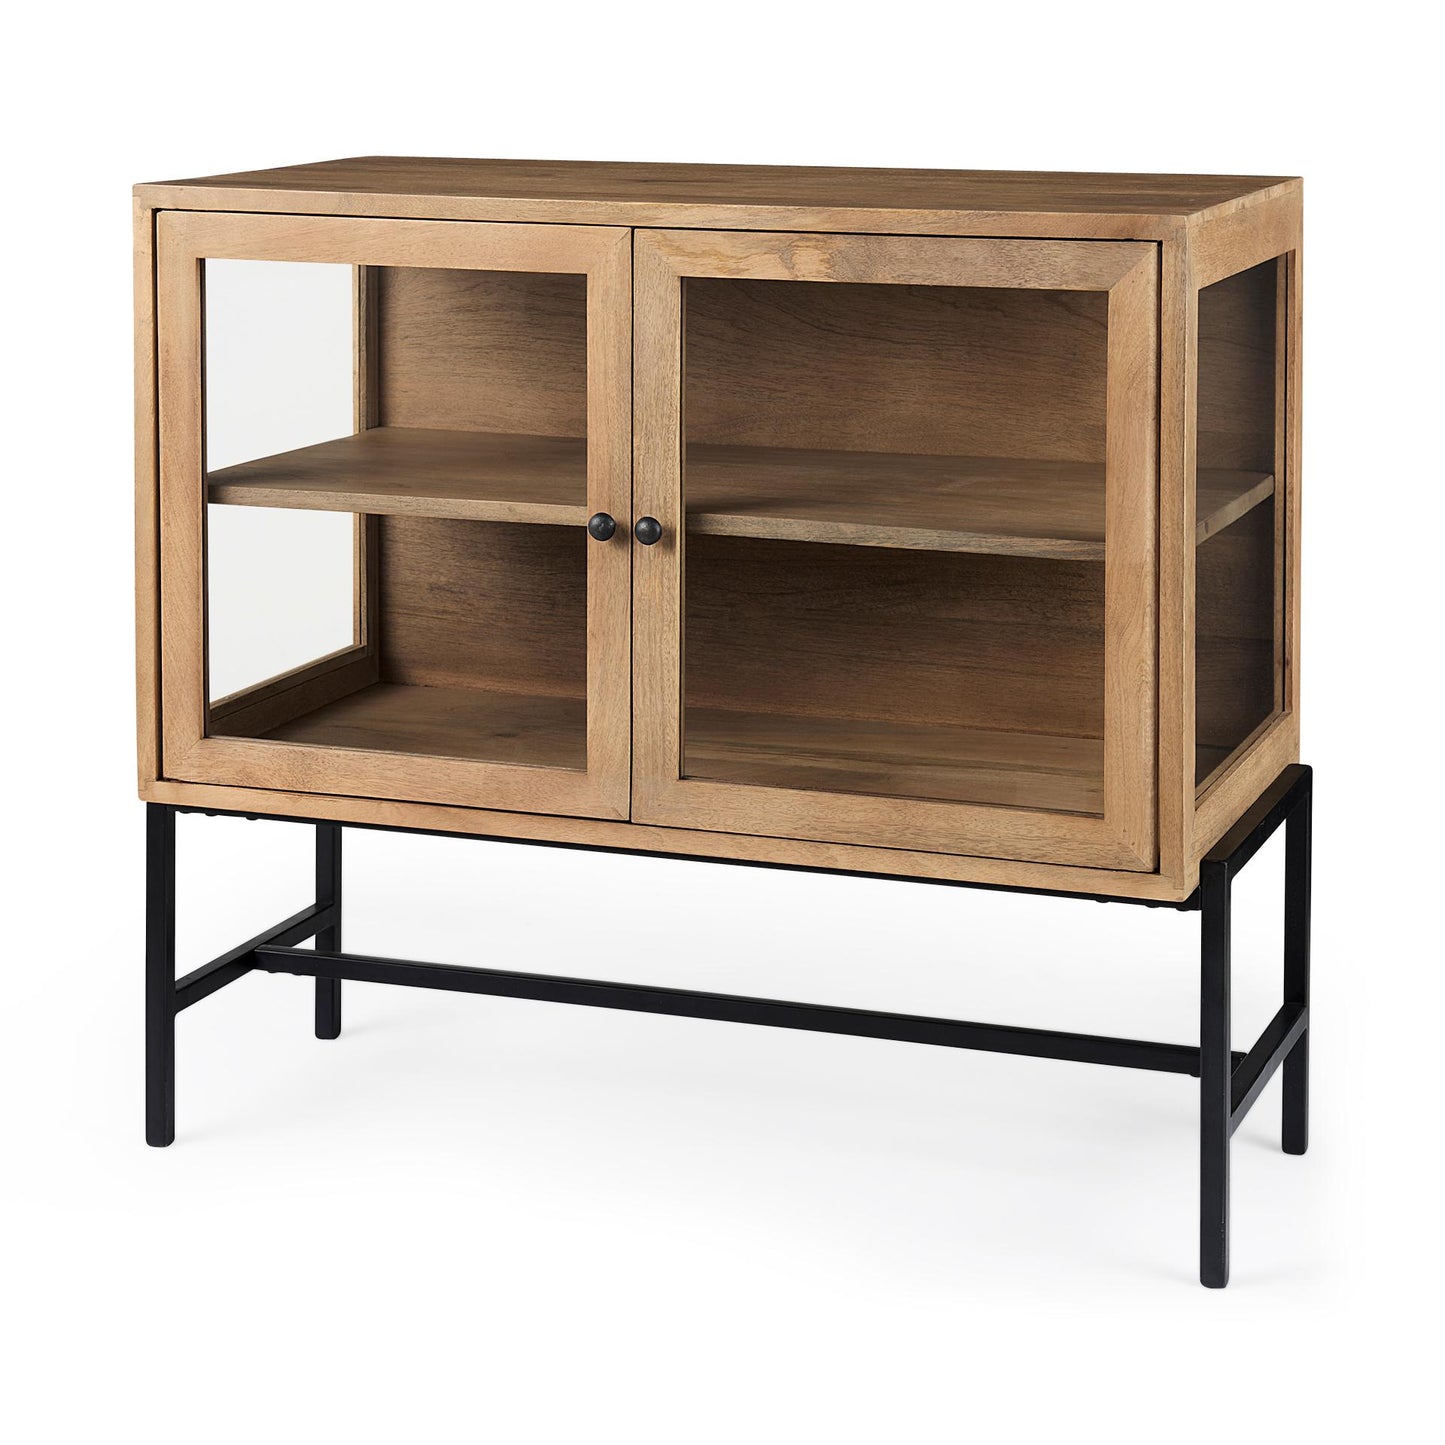 Arelius 36L x 18W x 32H Light Brown Wood, Black Metal Base w/ 2 Glass Doors Accent Cabinet